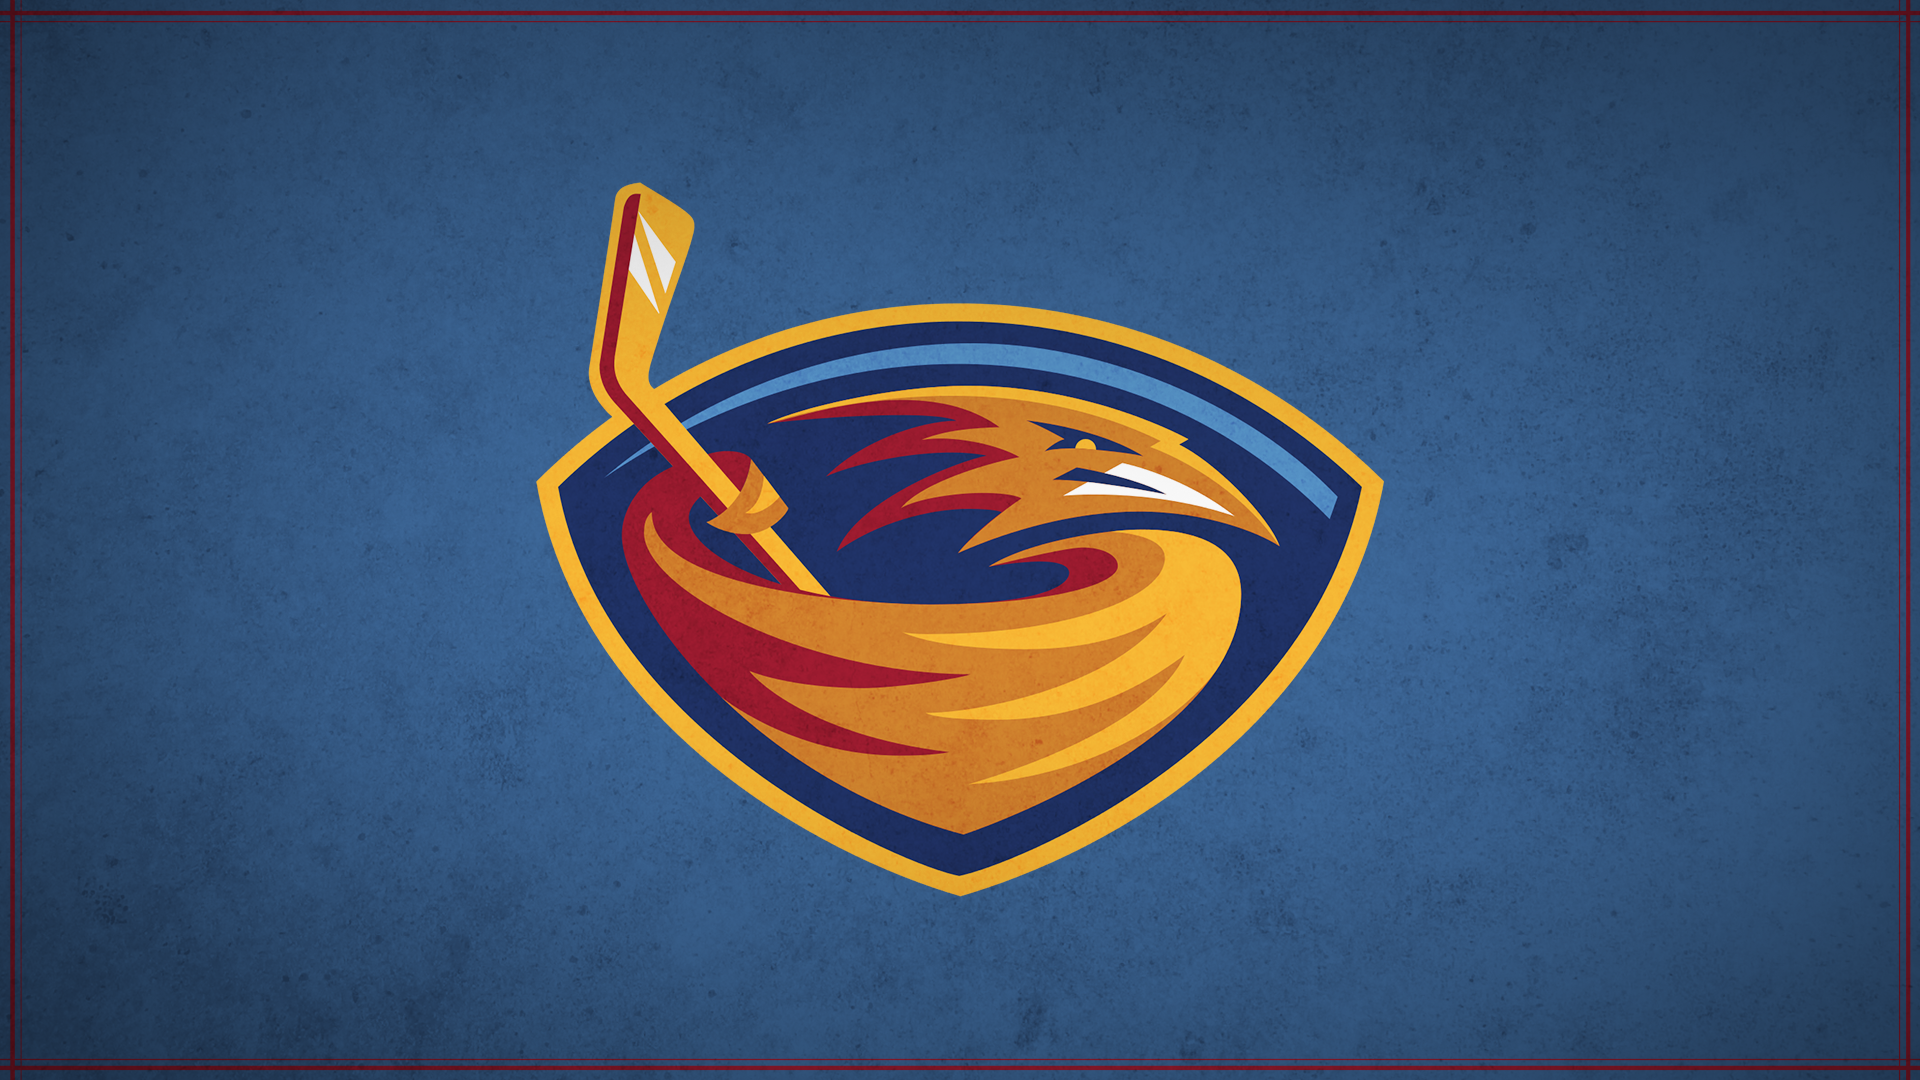 I made NHL team wallpaper least one for each team. Taking